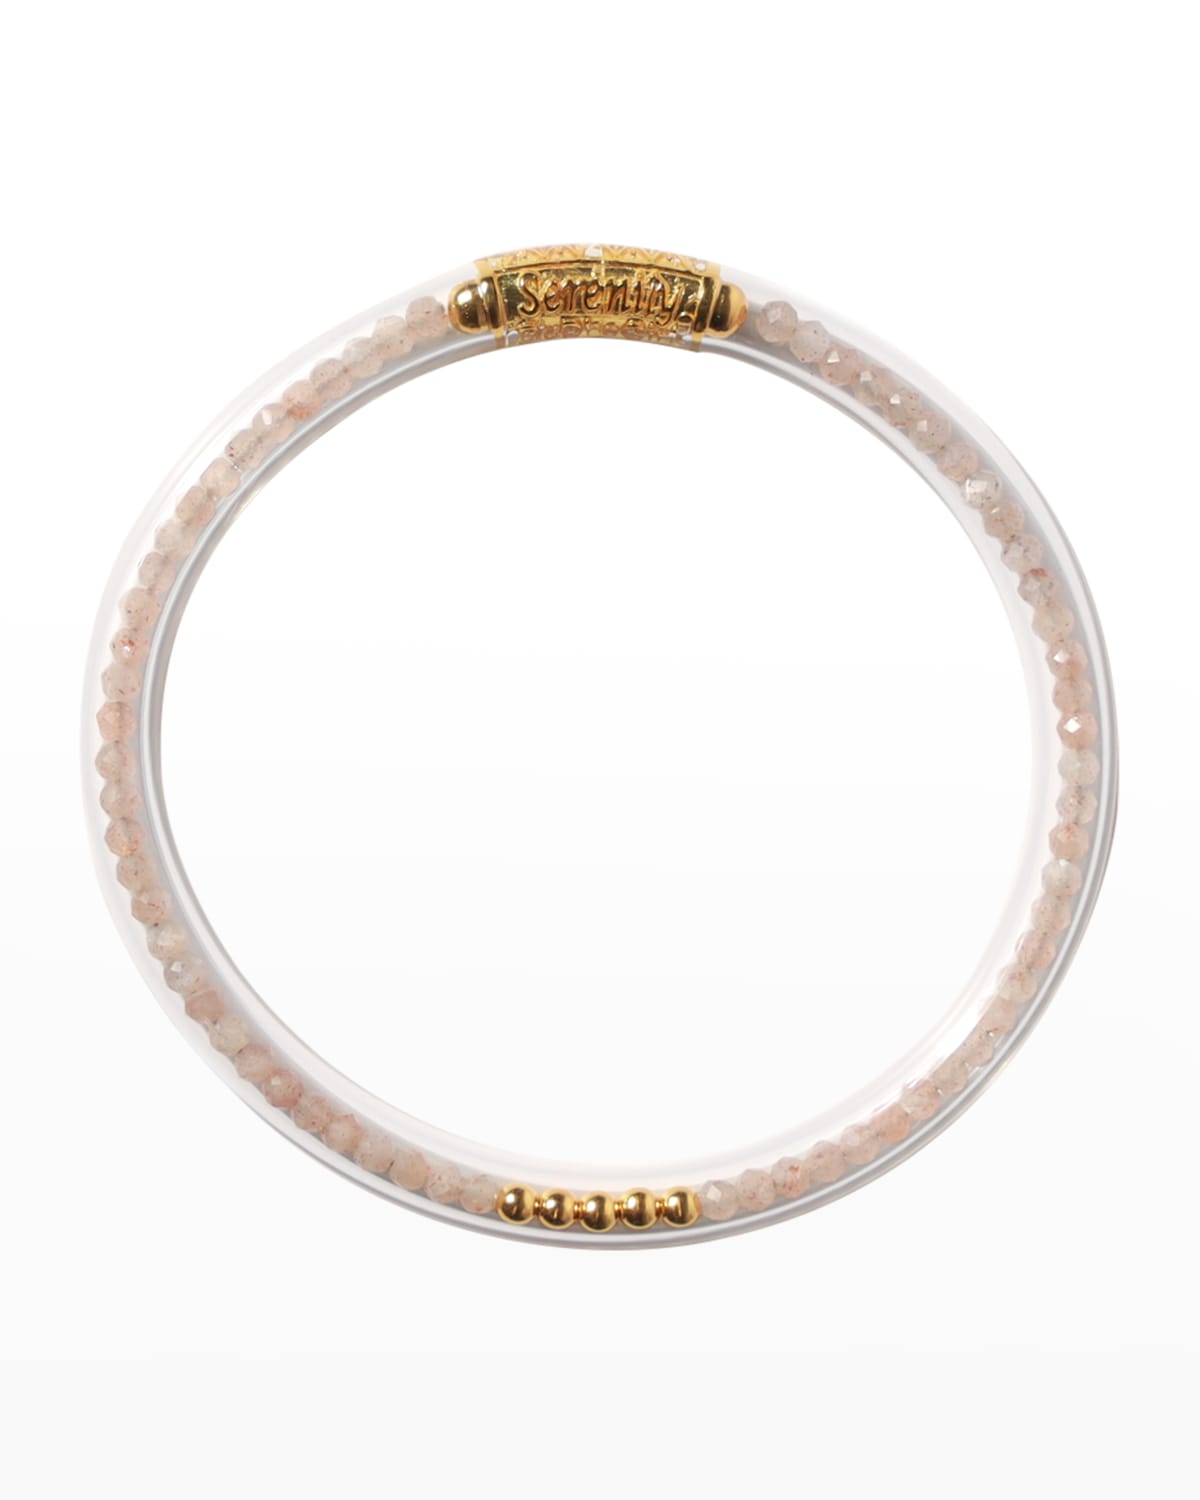 Serenity Prayer Luxe All Weather Bangle®